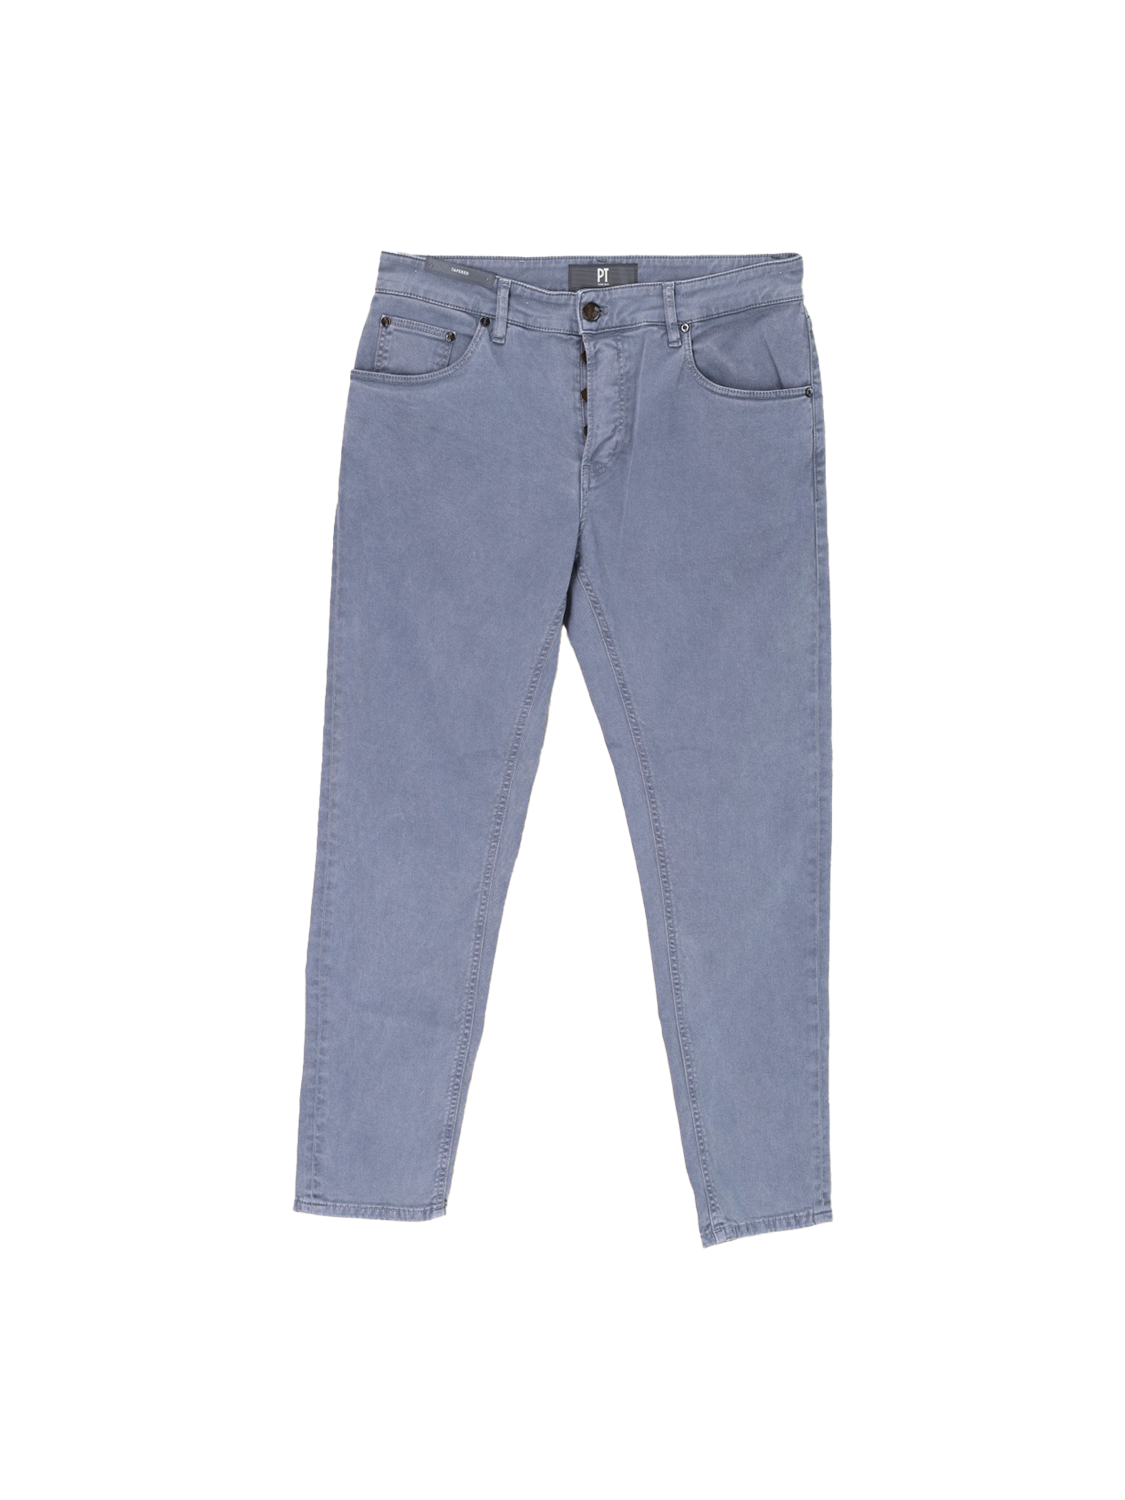 Tapered – Jeans cotton mix 